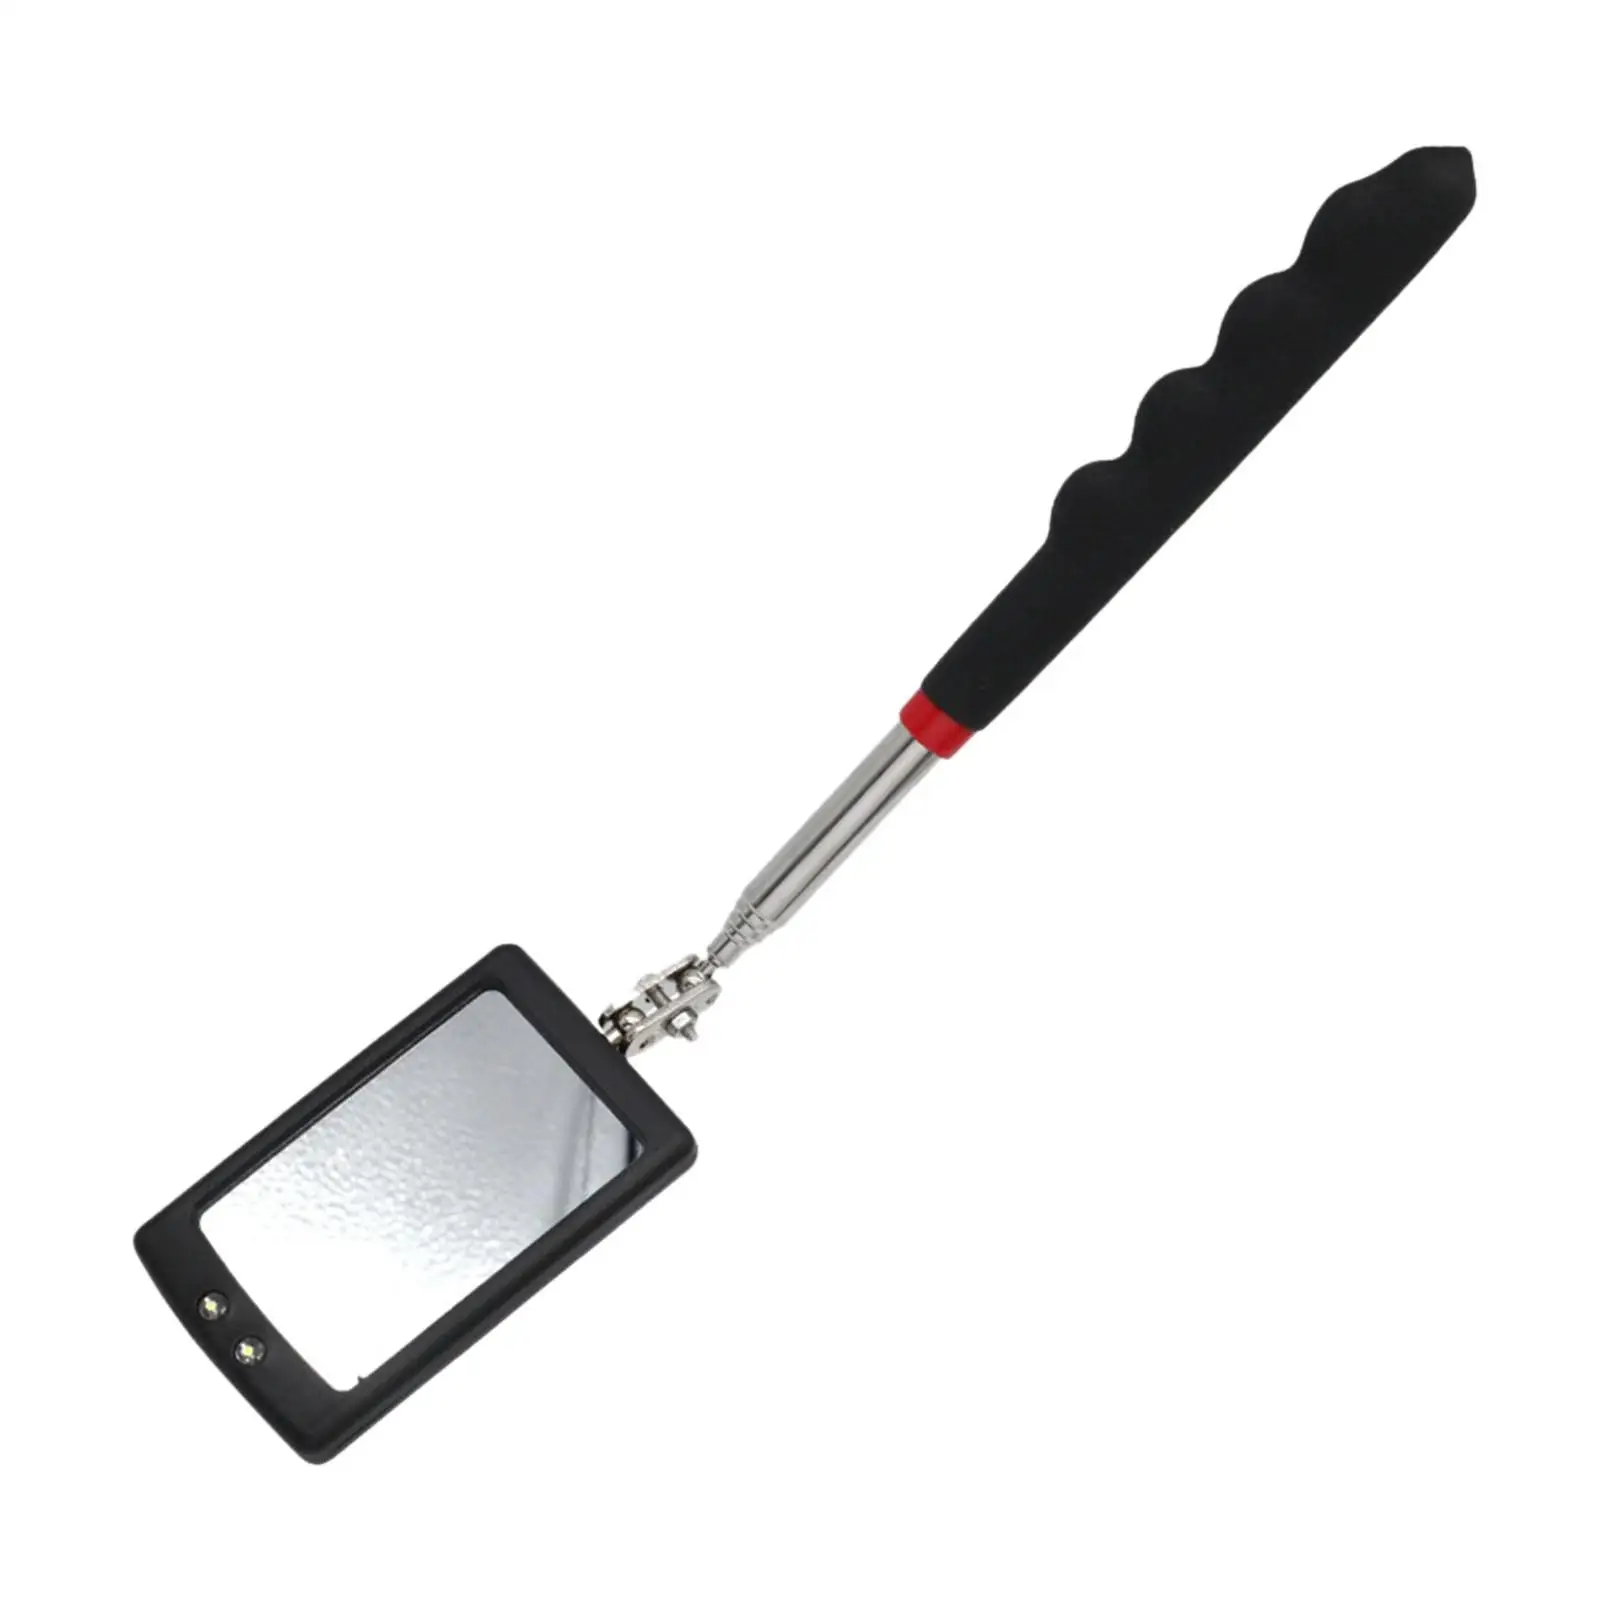 Inspection Mirror Telescoping Machine Inspection Mirror for Home Use Car Repair Eyelashes Small Parts Observation Home Inspector